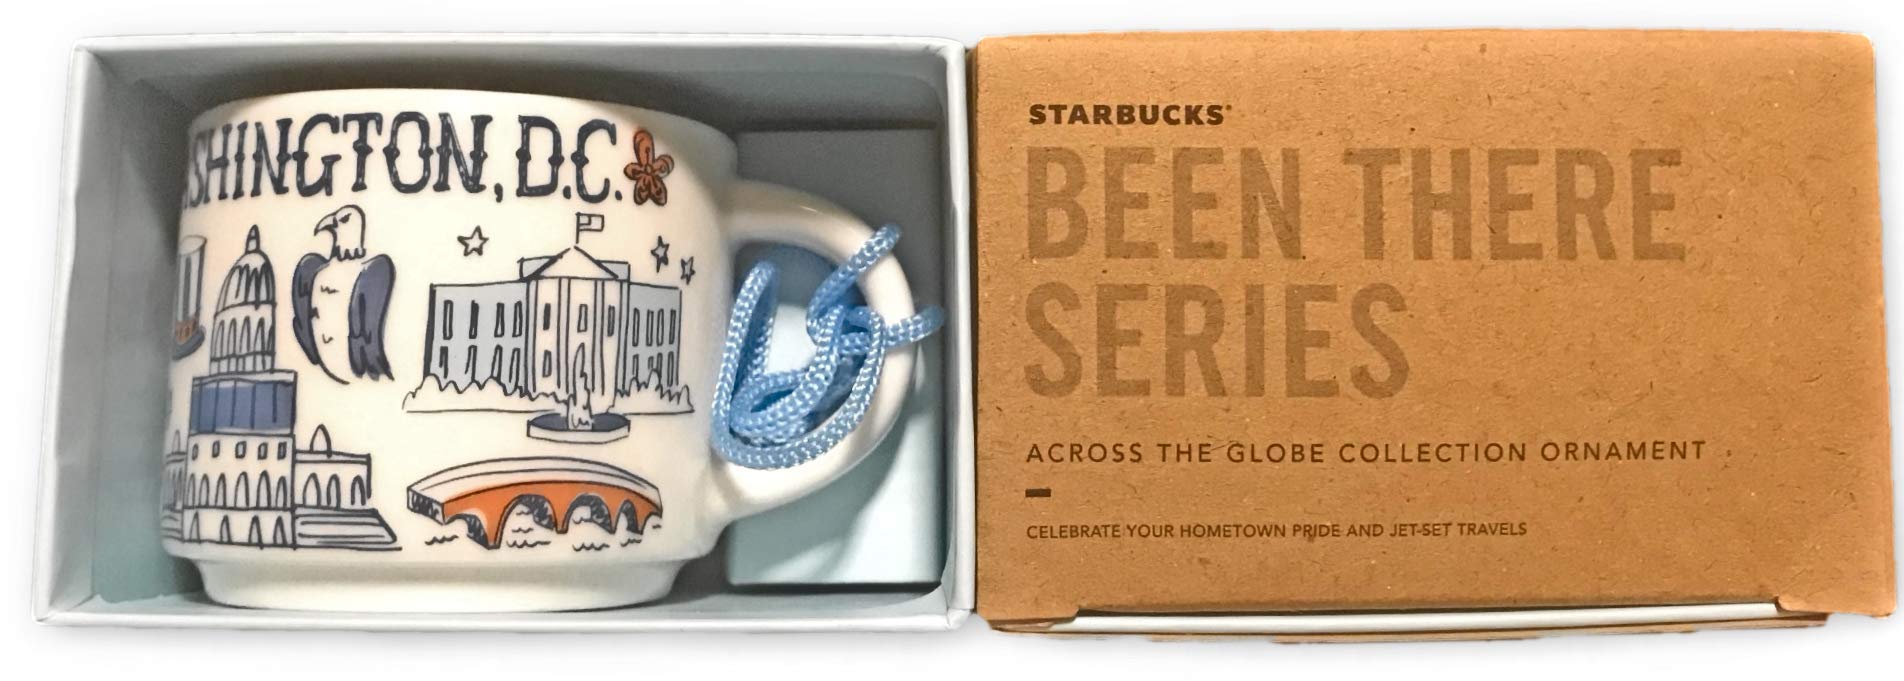 Starbucks Washington DC Been There Series Holiday Espresso Cup Ornament Gift Box